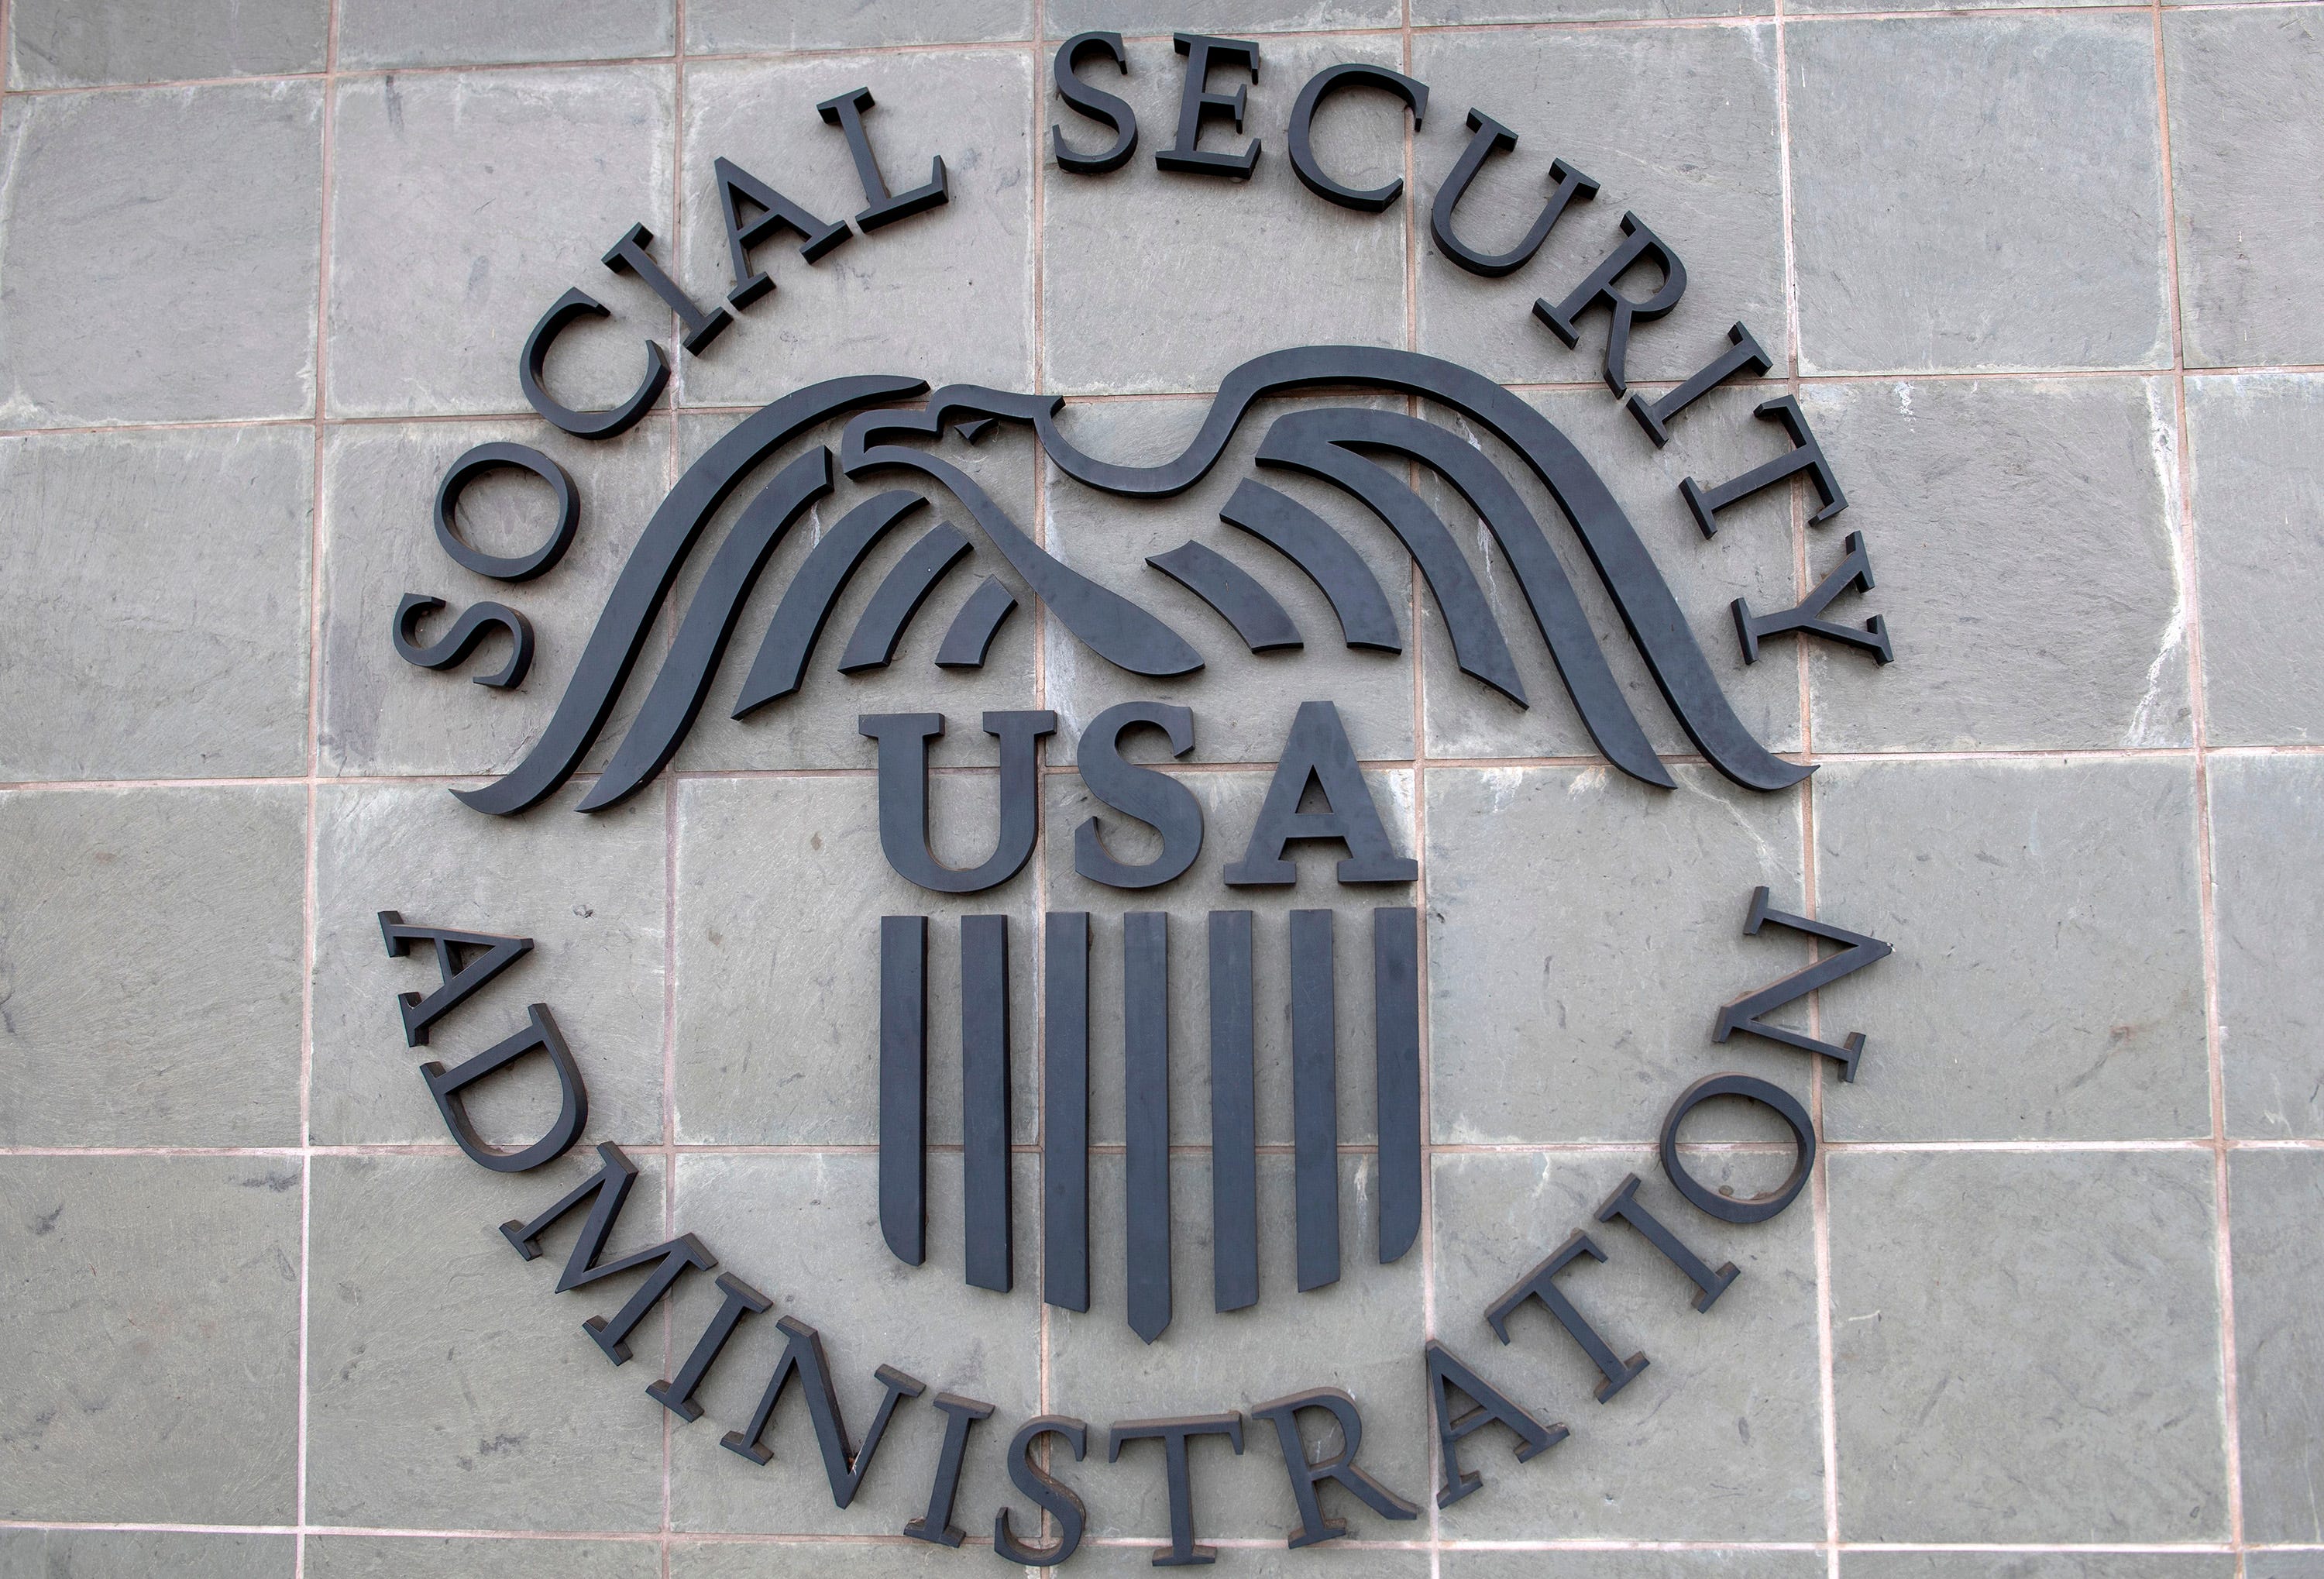 Social Security's internal watchdog failed to properly notify some poor and disabled Americans before levying huge fines on them.